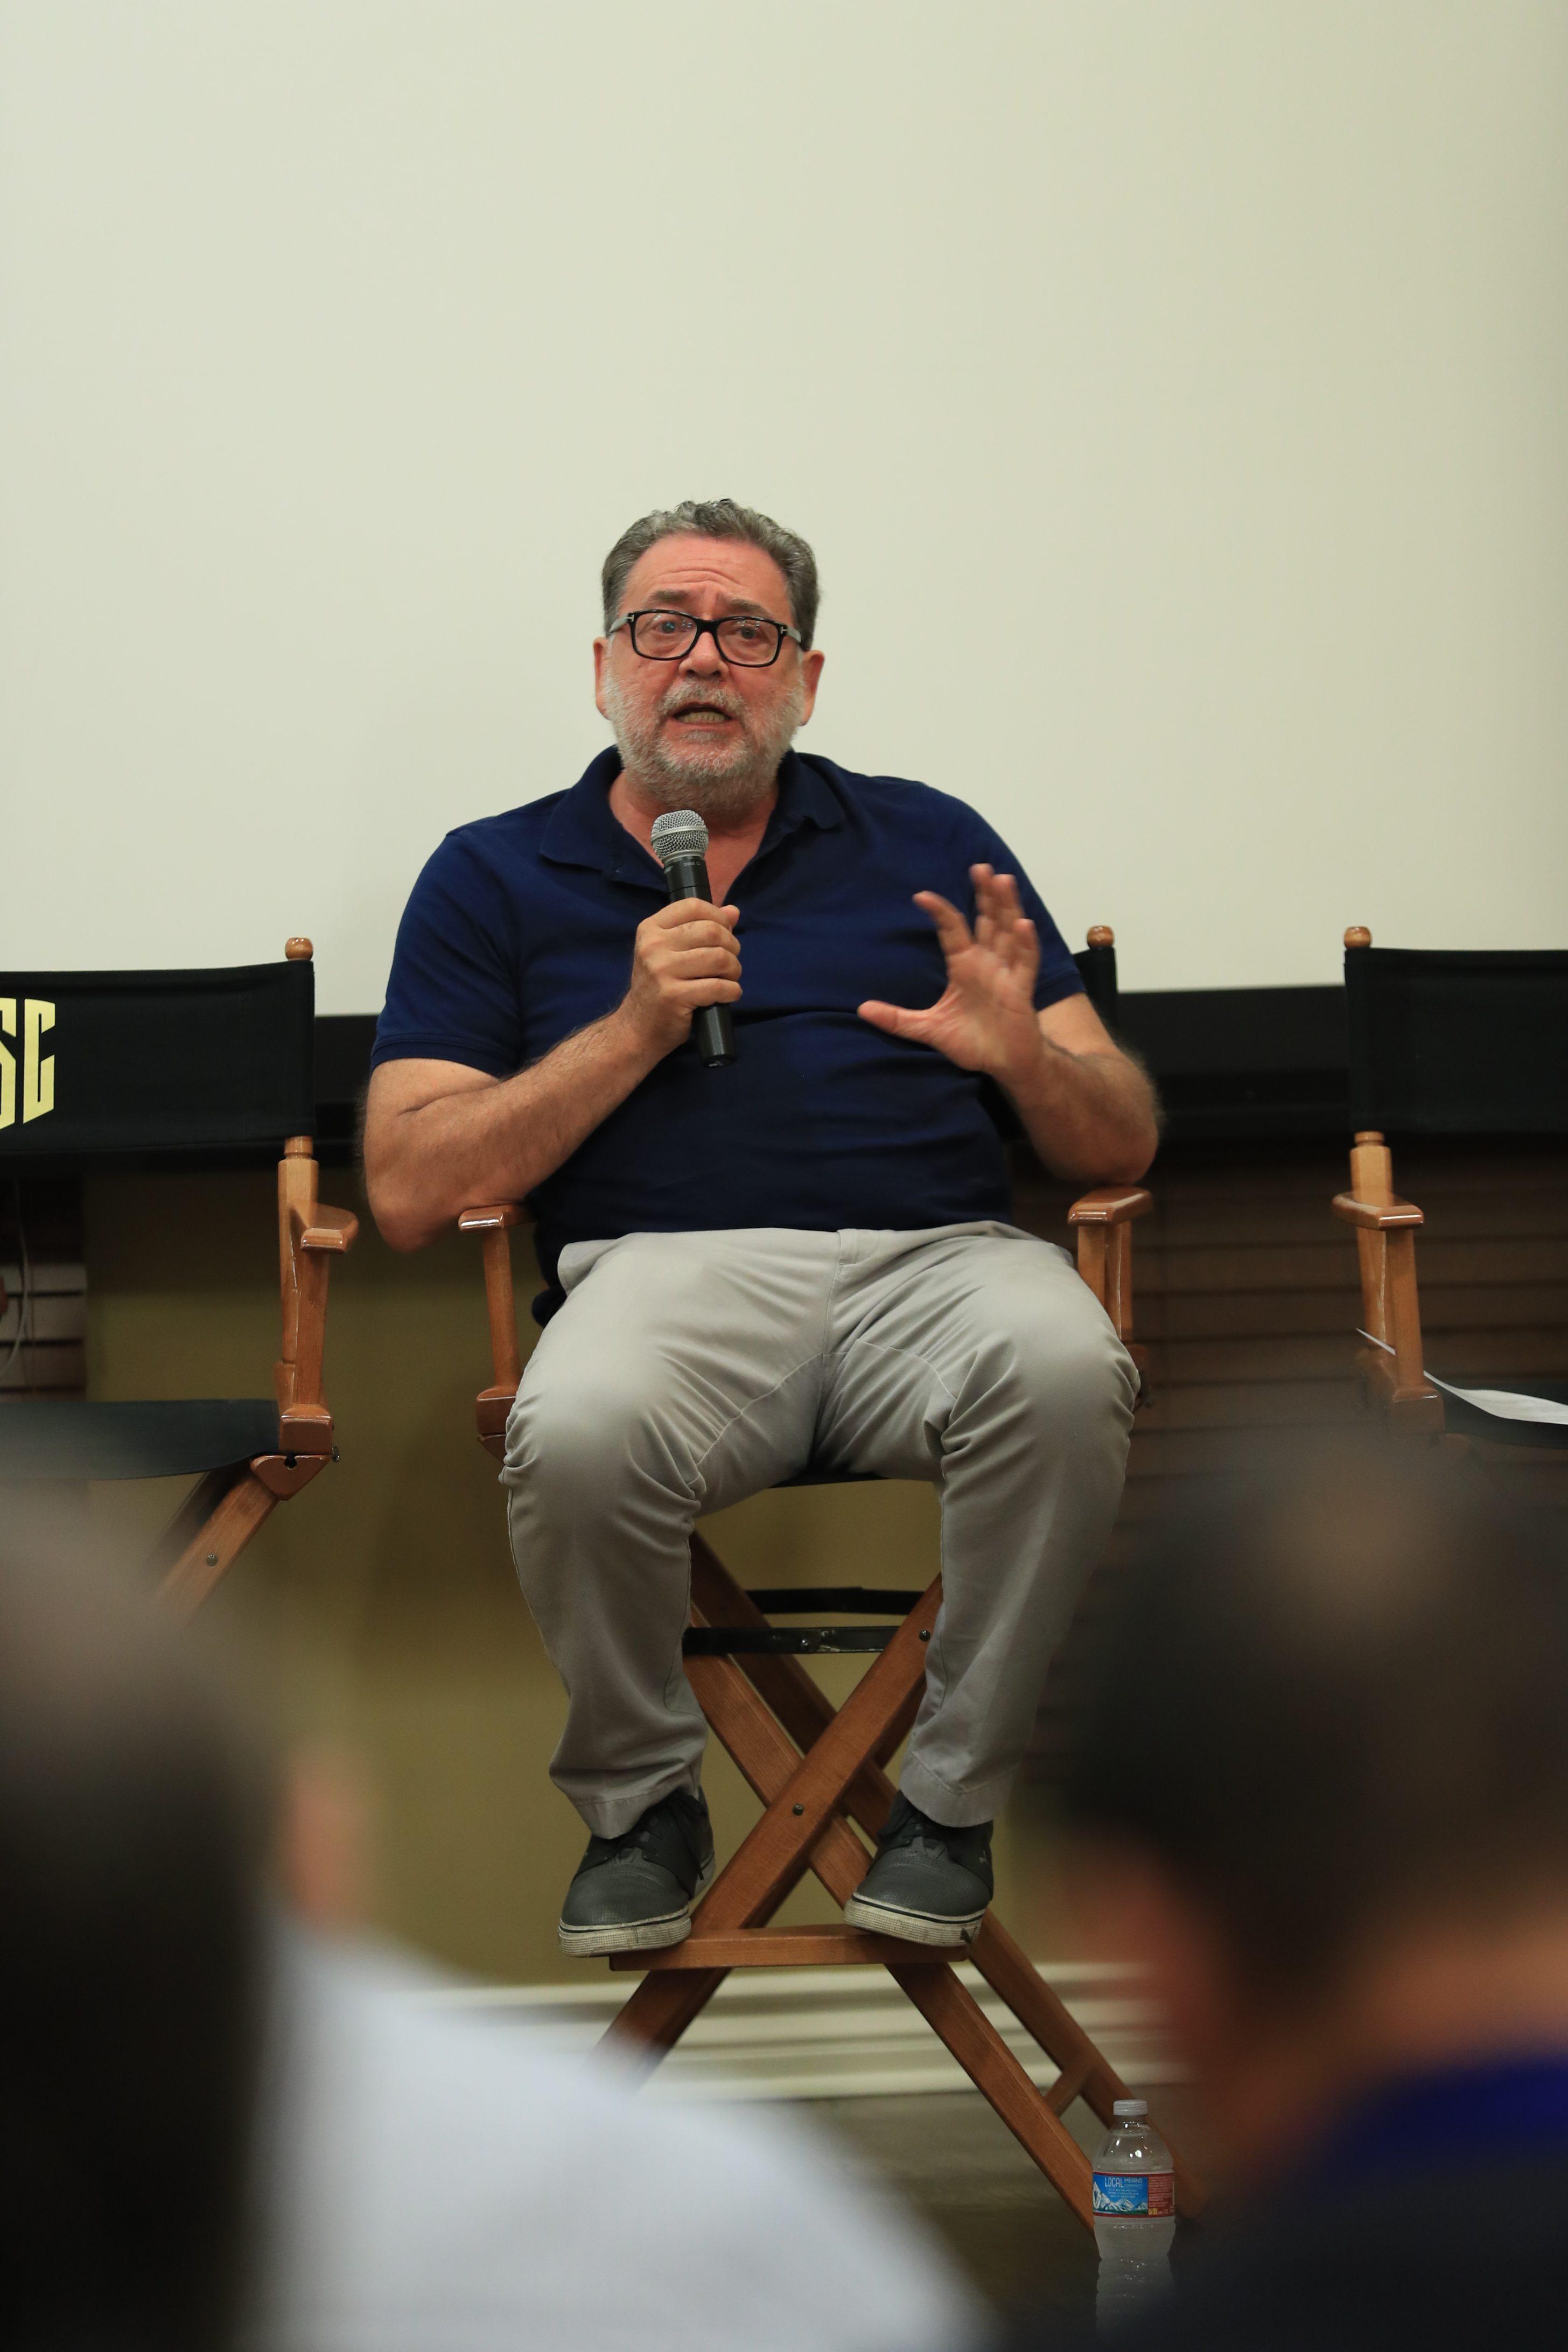 Guillermo Navarro, ASC, AMC speaks to the ICS assembly. Photo by James Neihouse, ASC